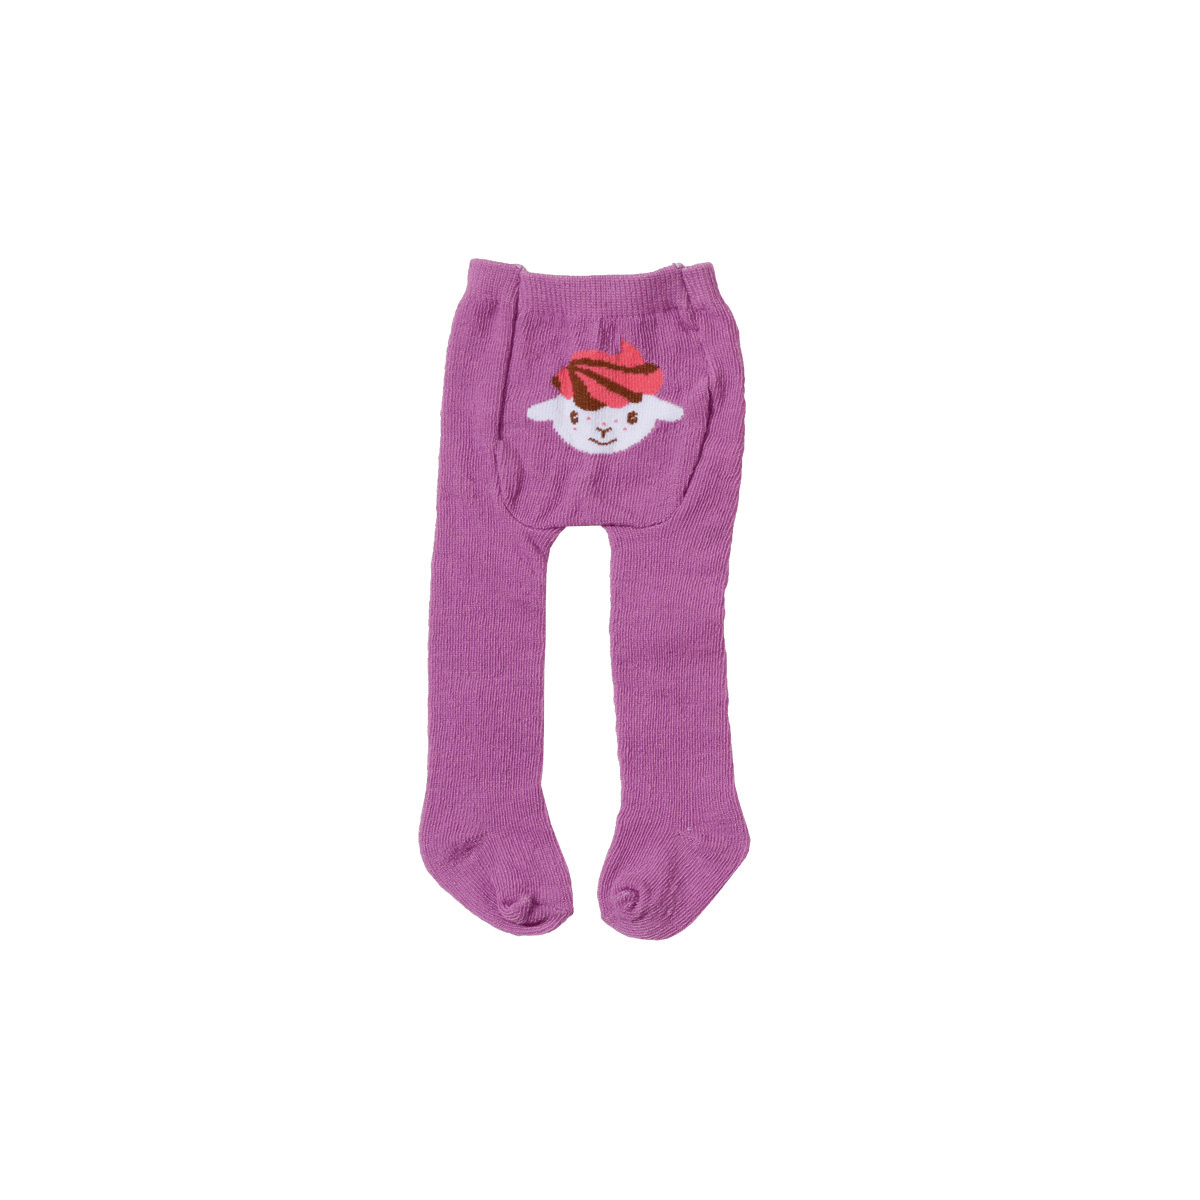  Baby Annabell Tights - Purple